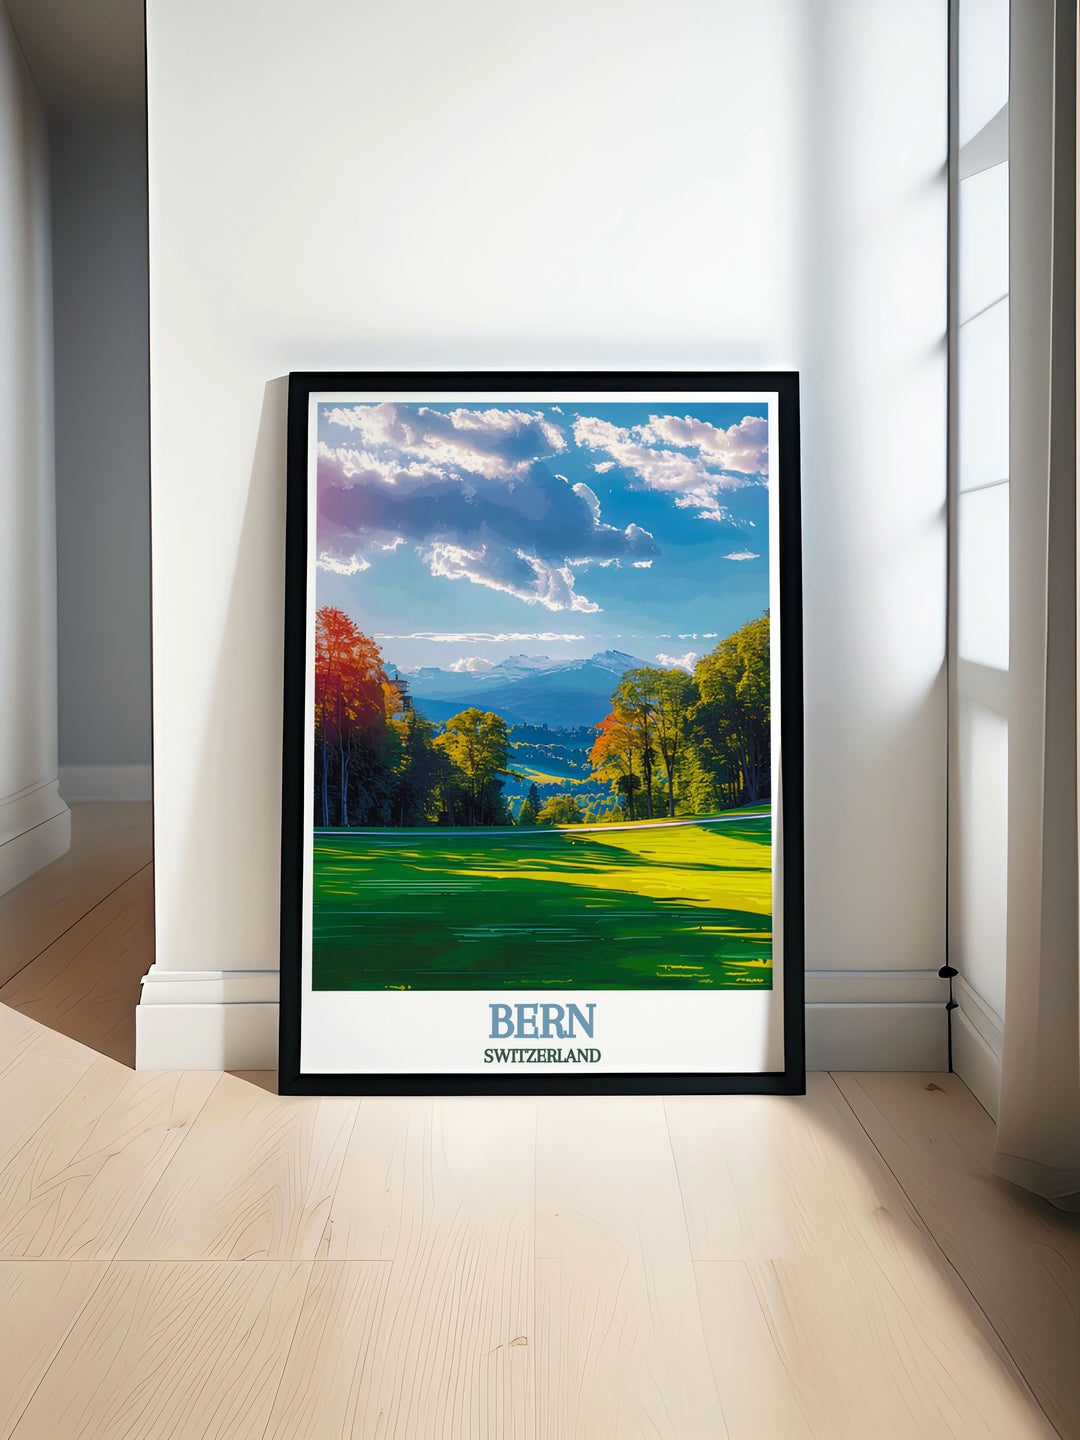 Featuring the lush greenery and historic bridges along the Aare River, this travel poster captures the natural beauty of Bern, ideal for those who appreciate scenic landscapes.